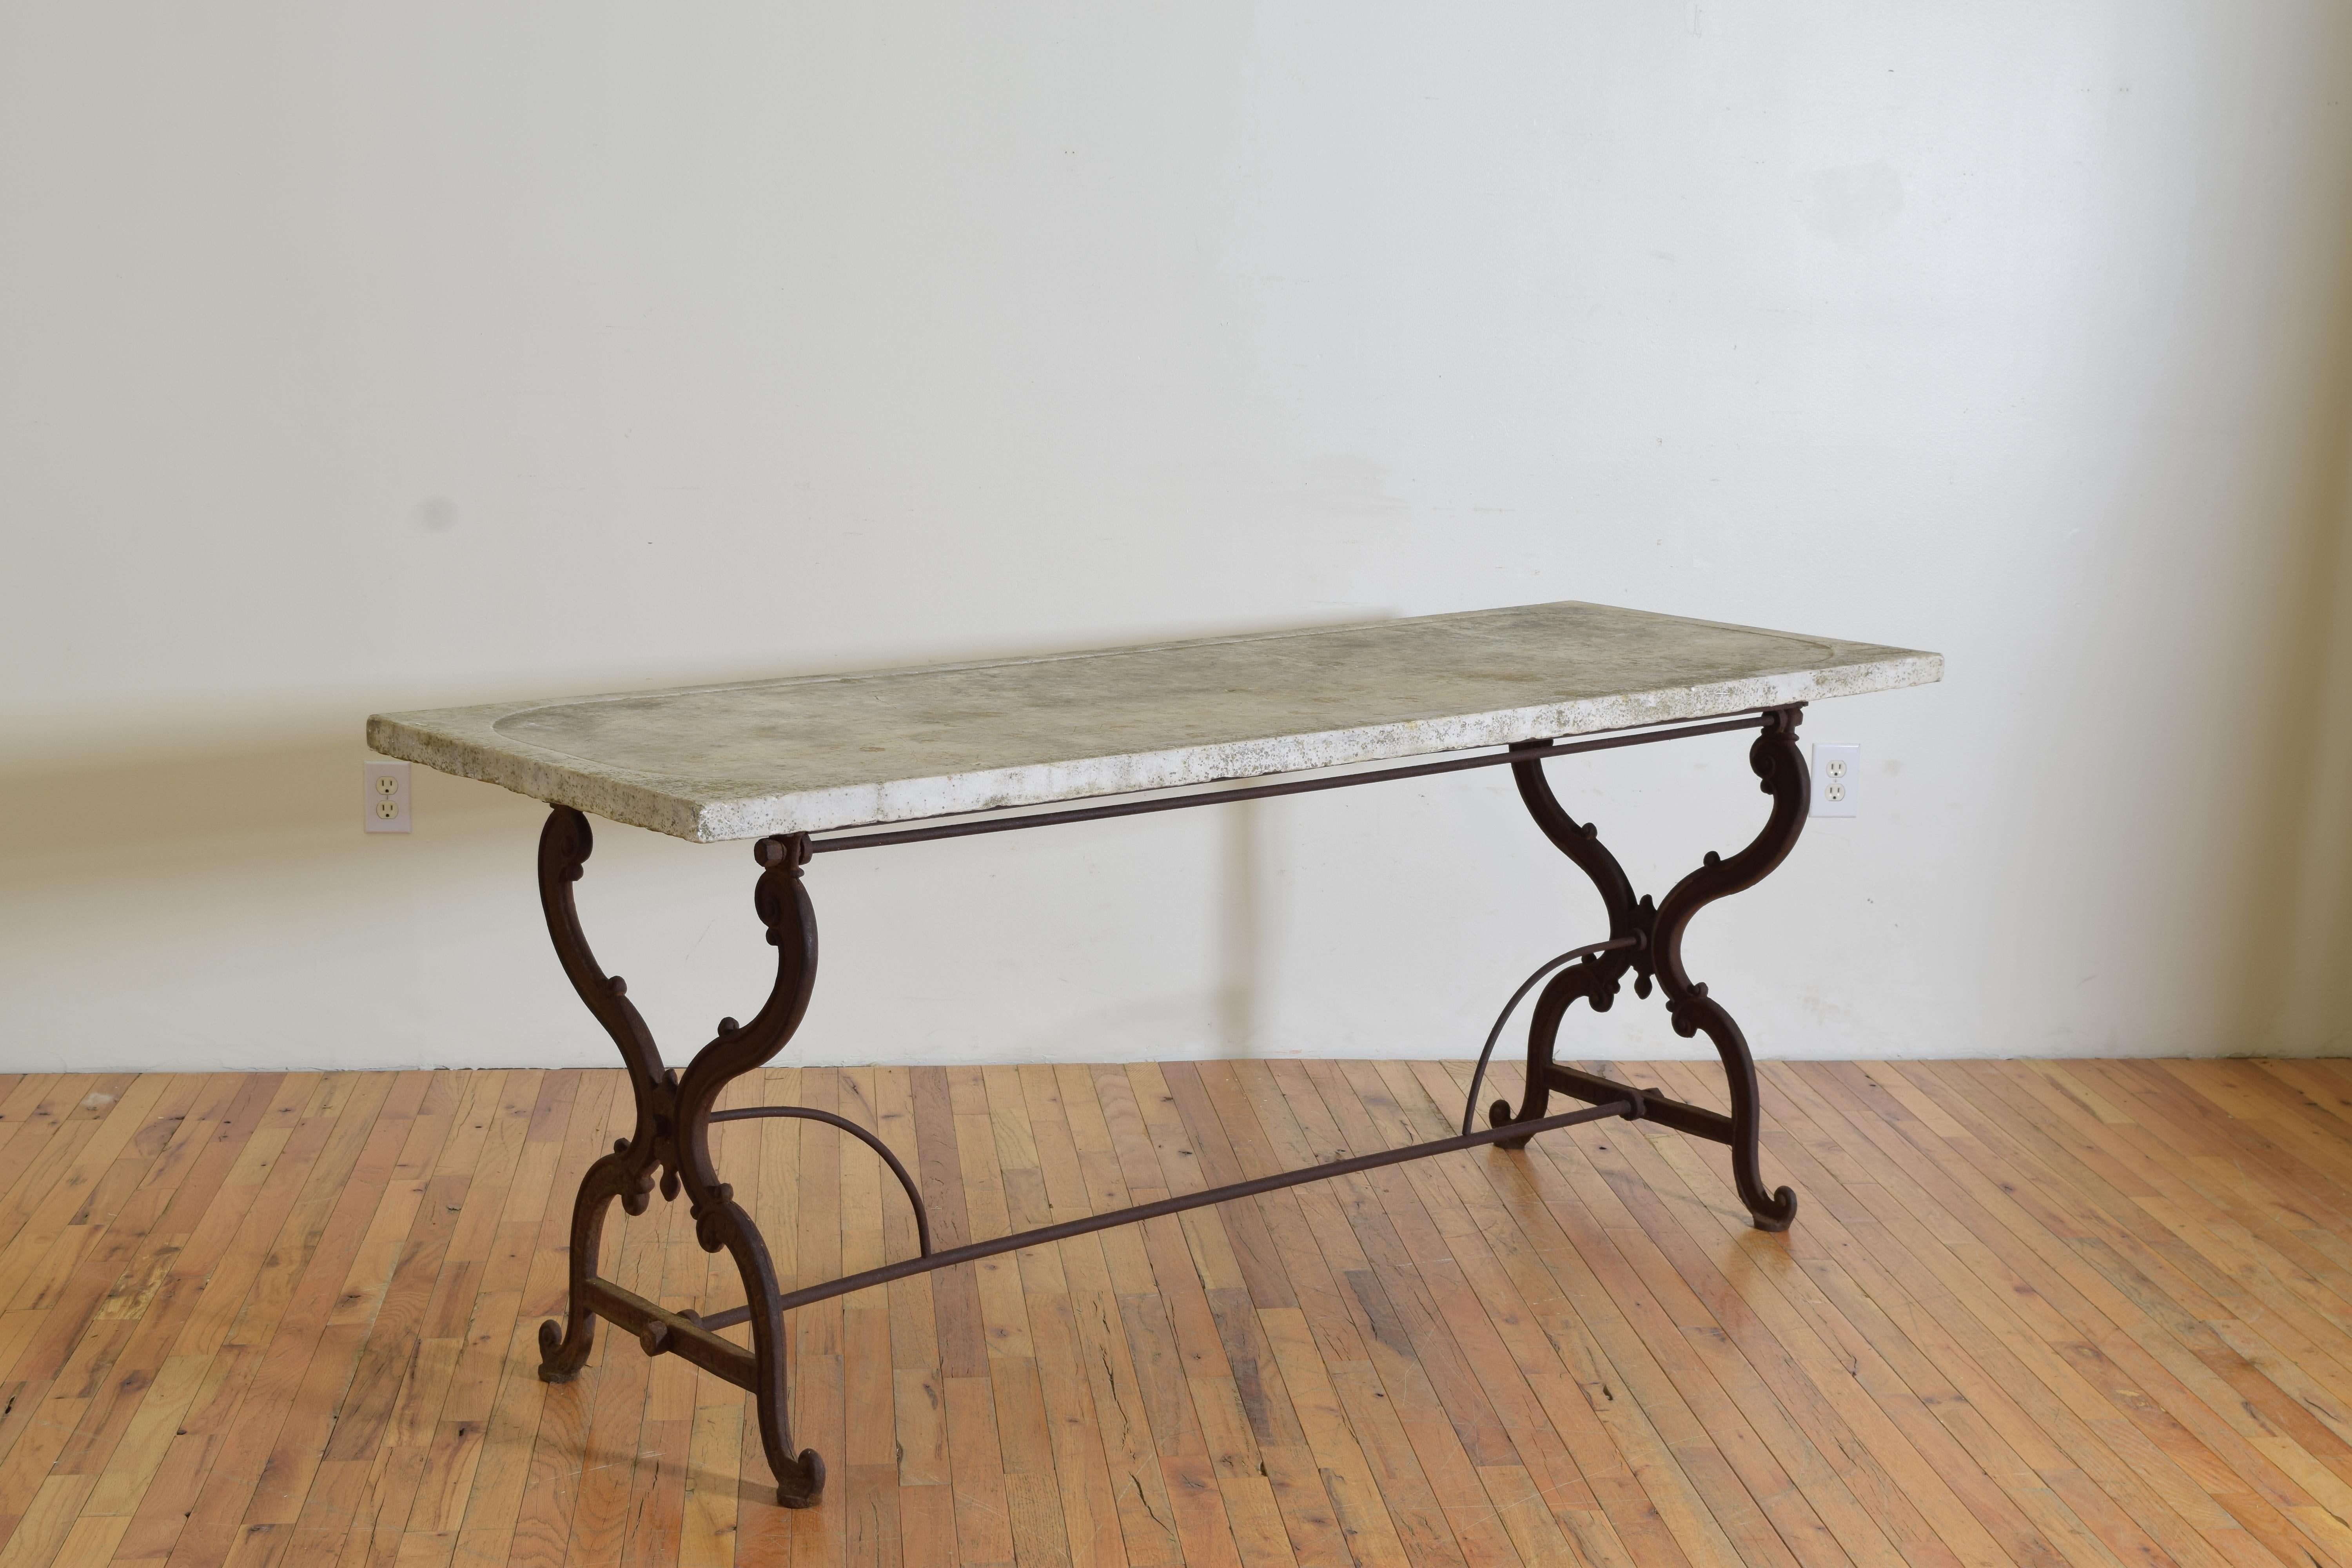 Having a very thick rectangular marble top with a slightly sunken center and drain hole at middle, the top resting on a wrought iron base with scrolled x-form supports joined by a solid round bar elongated h-form stretcher with additional curved